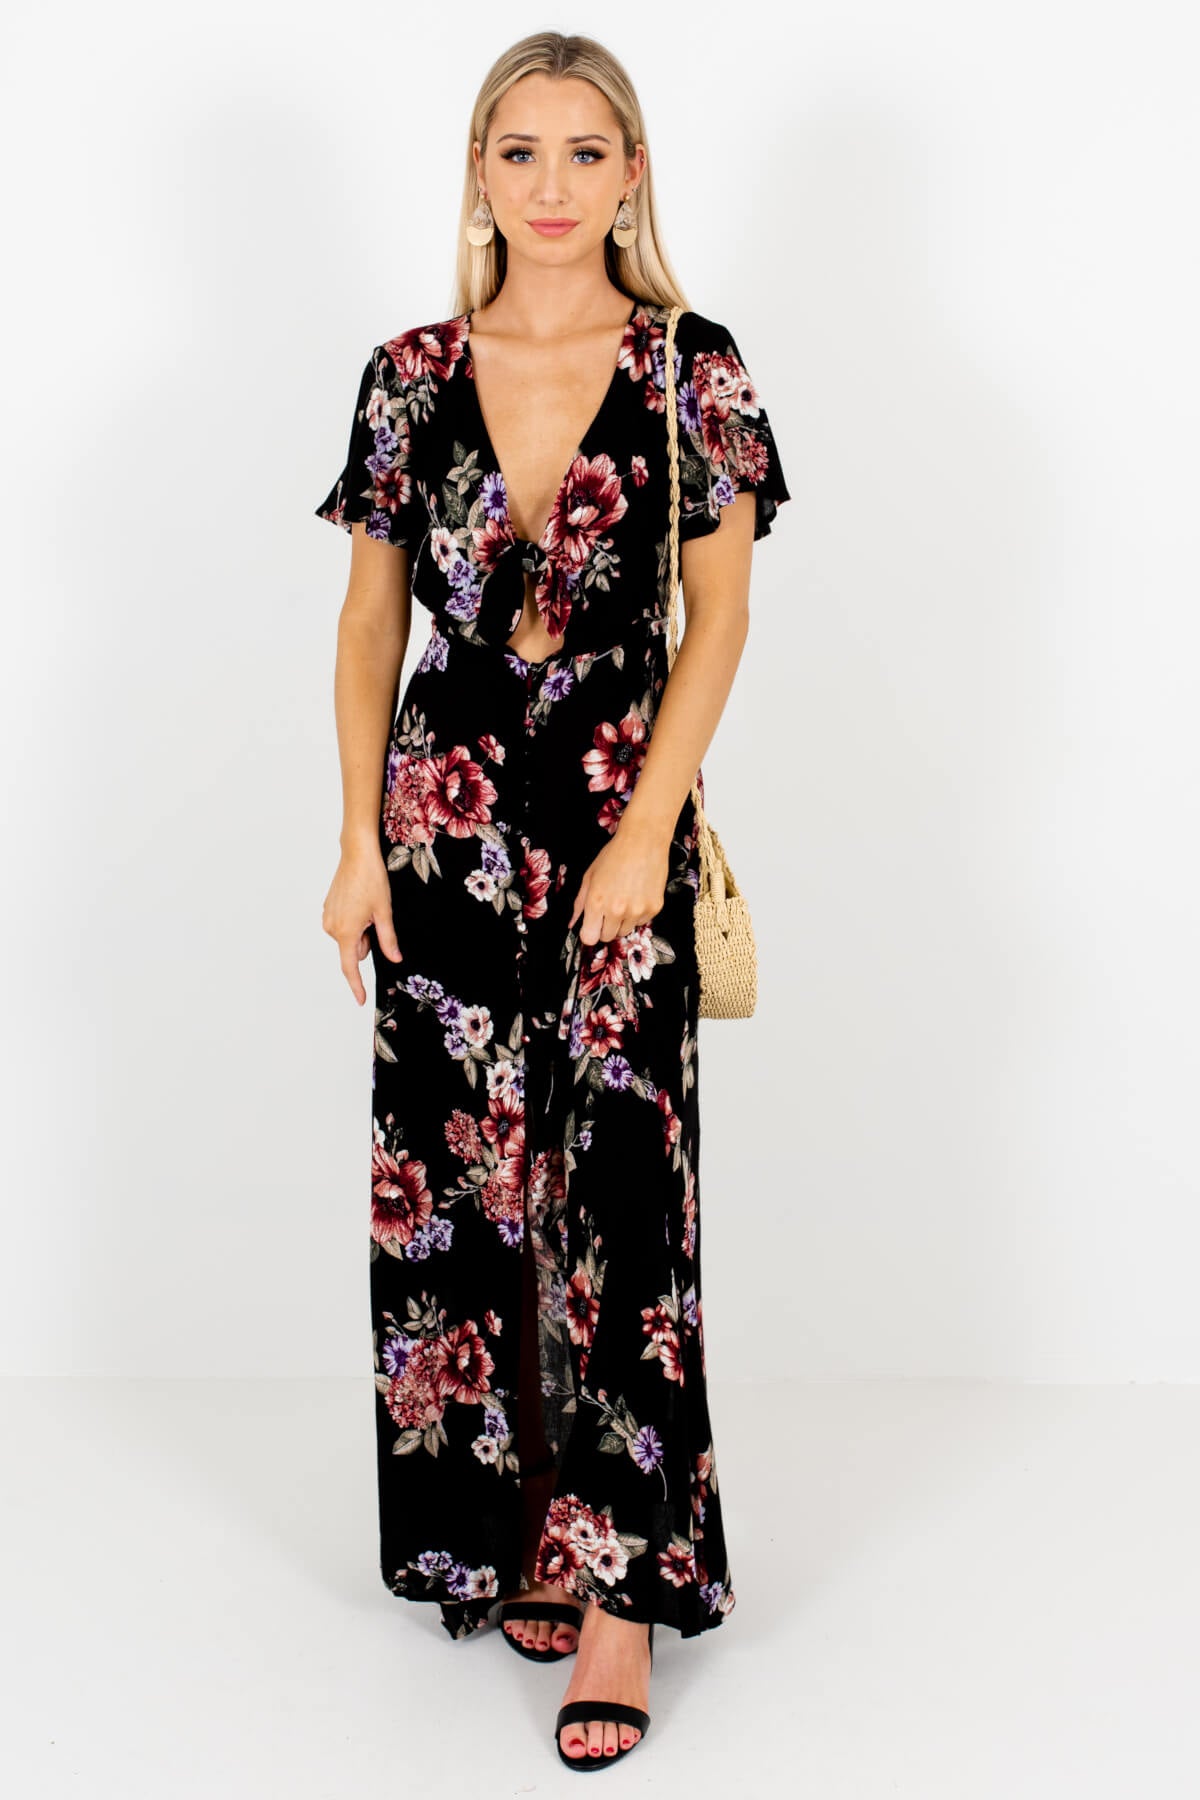 Black Floral Cute and Comfortable Boutique Maxi Dresses for Women